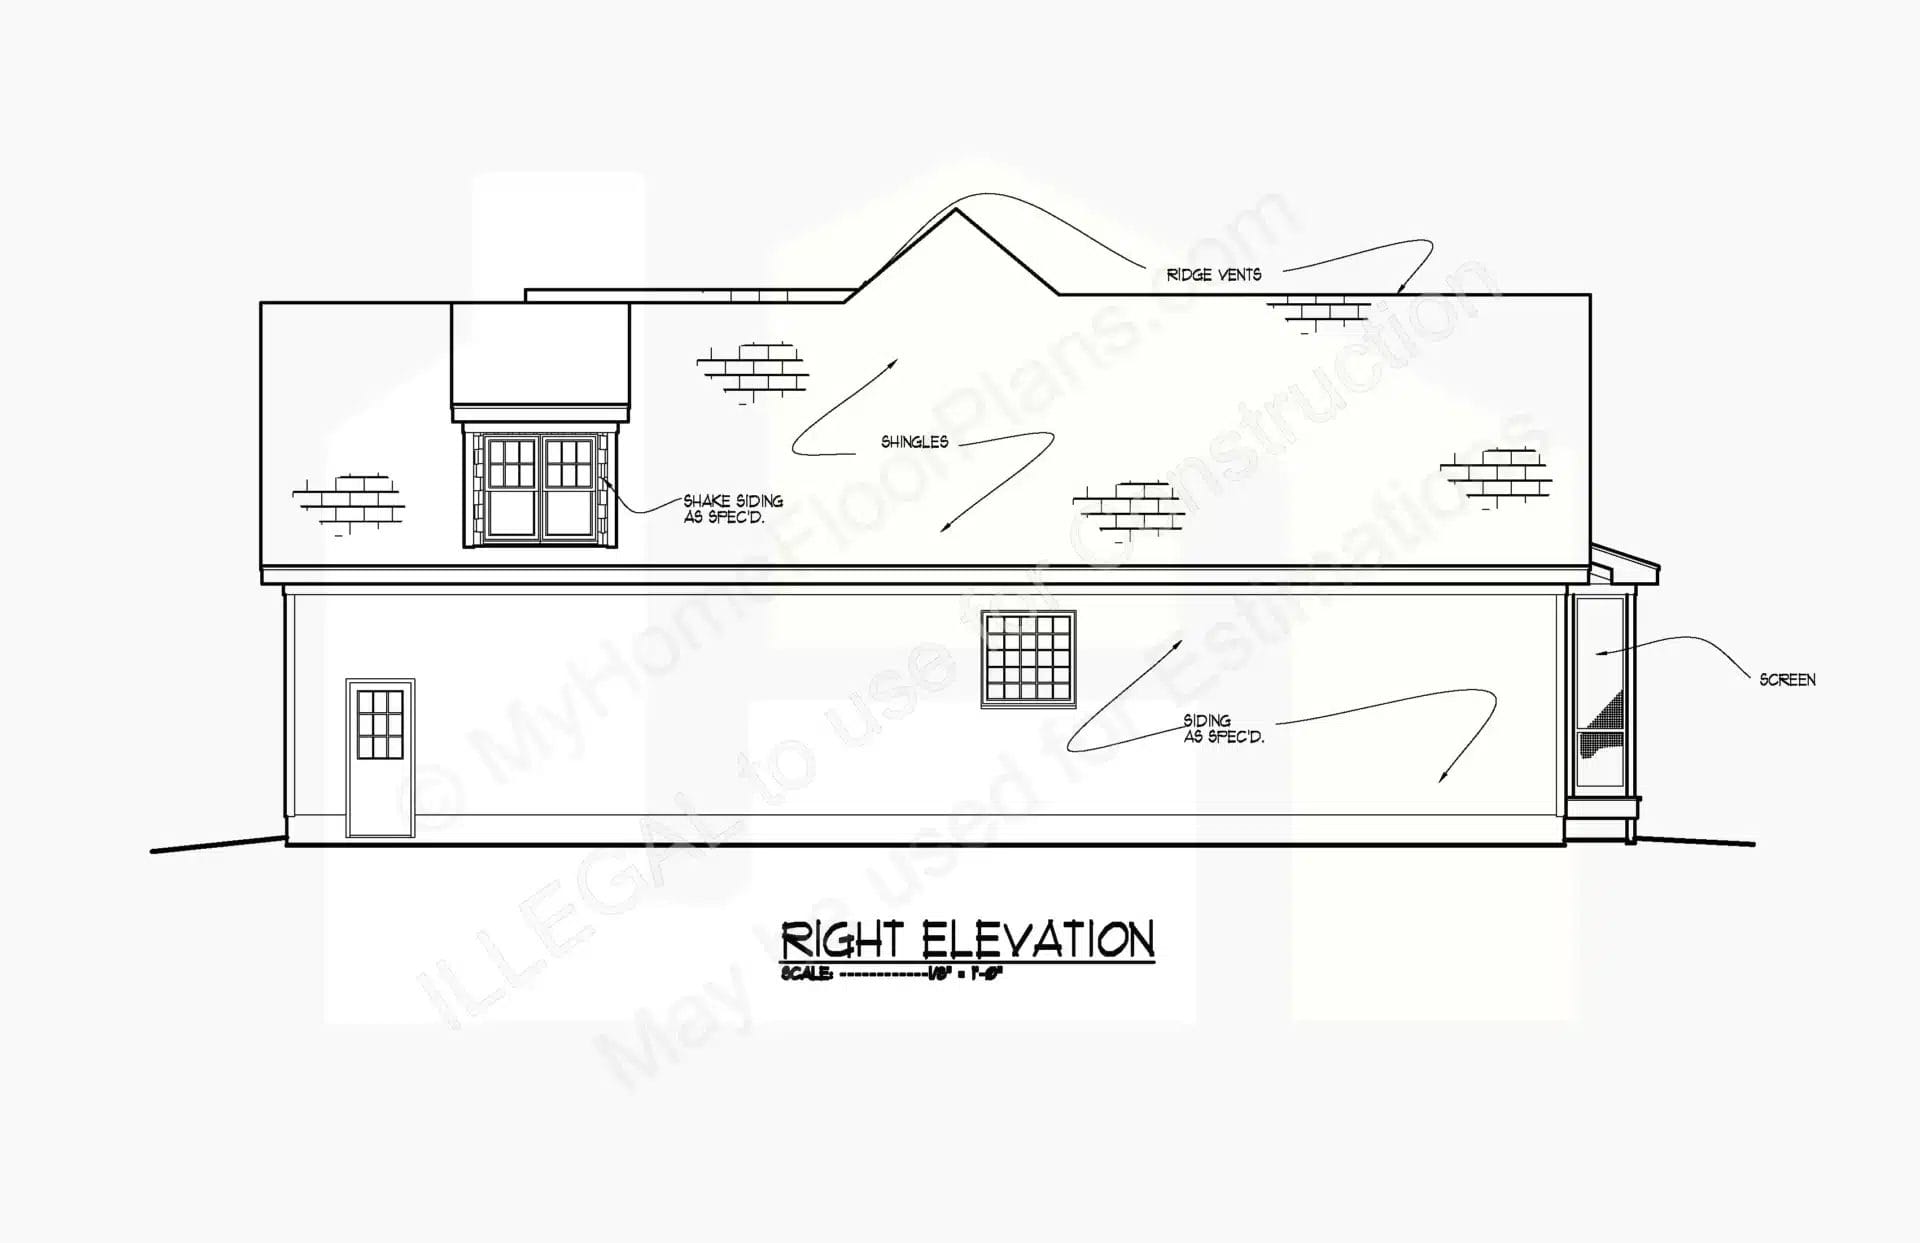 Architectural drawing labeled "right elevation" of a two-story house, featuring labeled elements like roof vents, double-hung windows, single doors, and a screen. The floor plan includes a 12-2289.